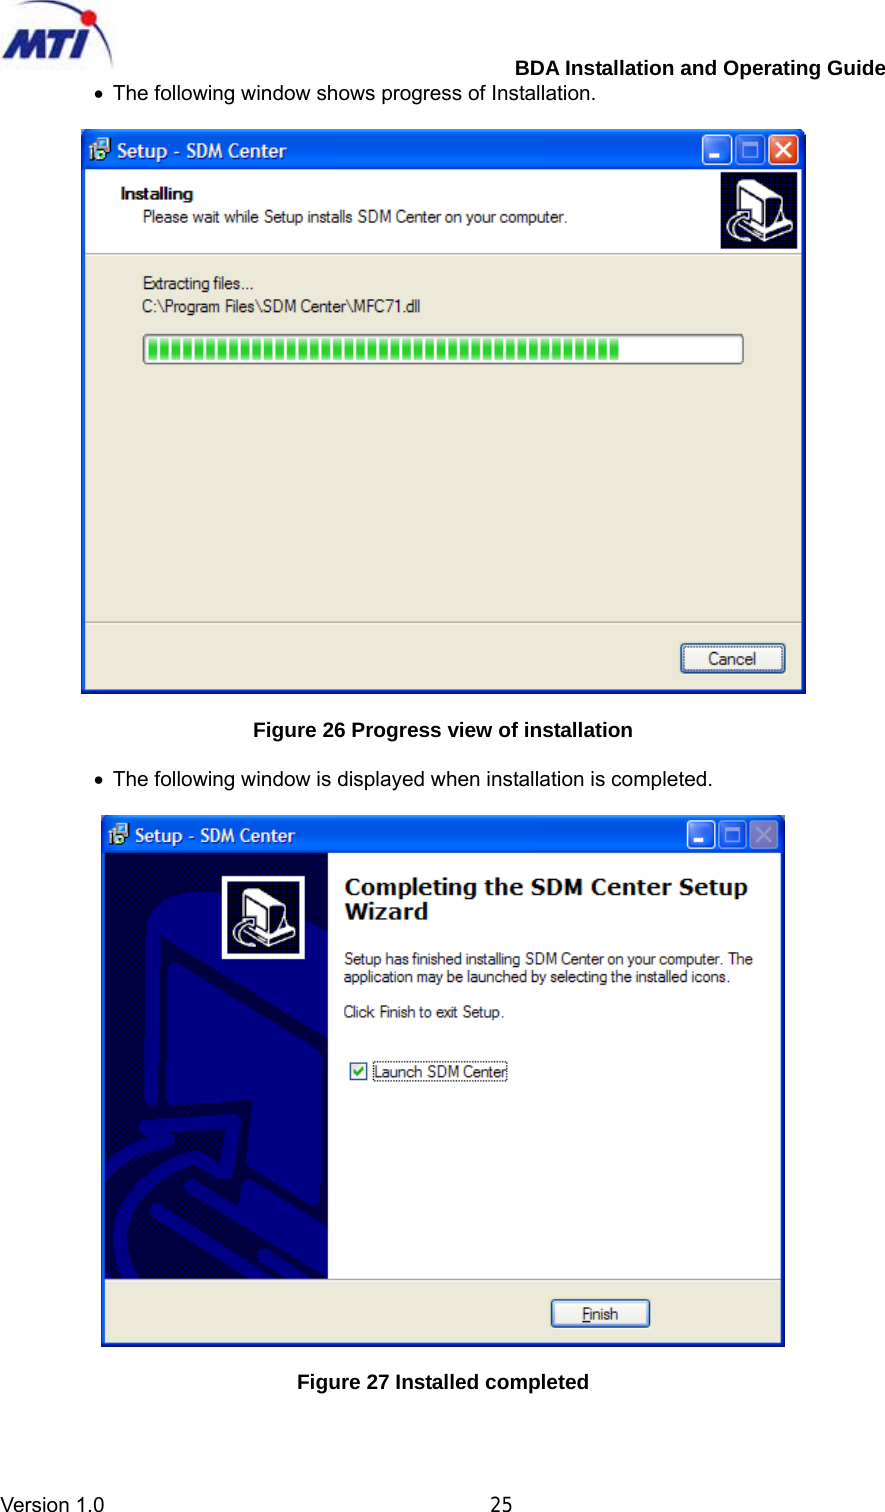         BDA Installation and Operating Guide Version 1.0                                       25 •  The following window shows progress of Installation.    Figure 26 Progress view of installation  •  The following window is displayed when installation is completed.    Figure 27 Installed completed   